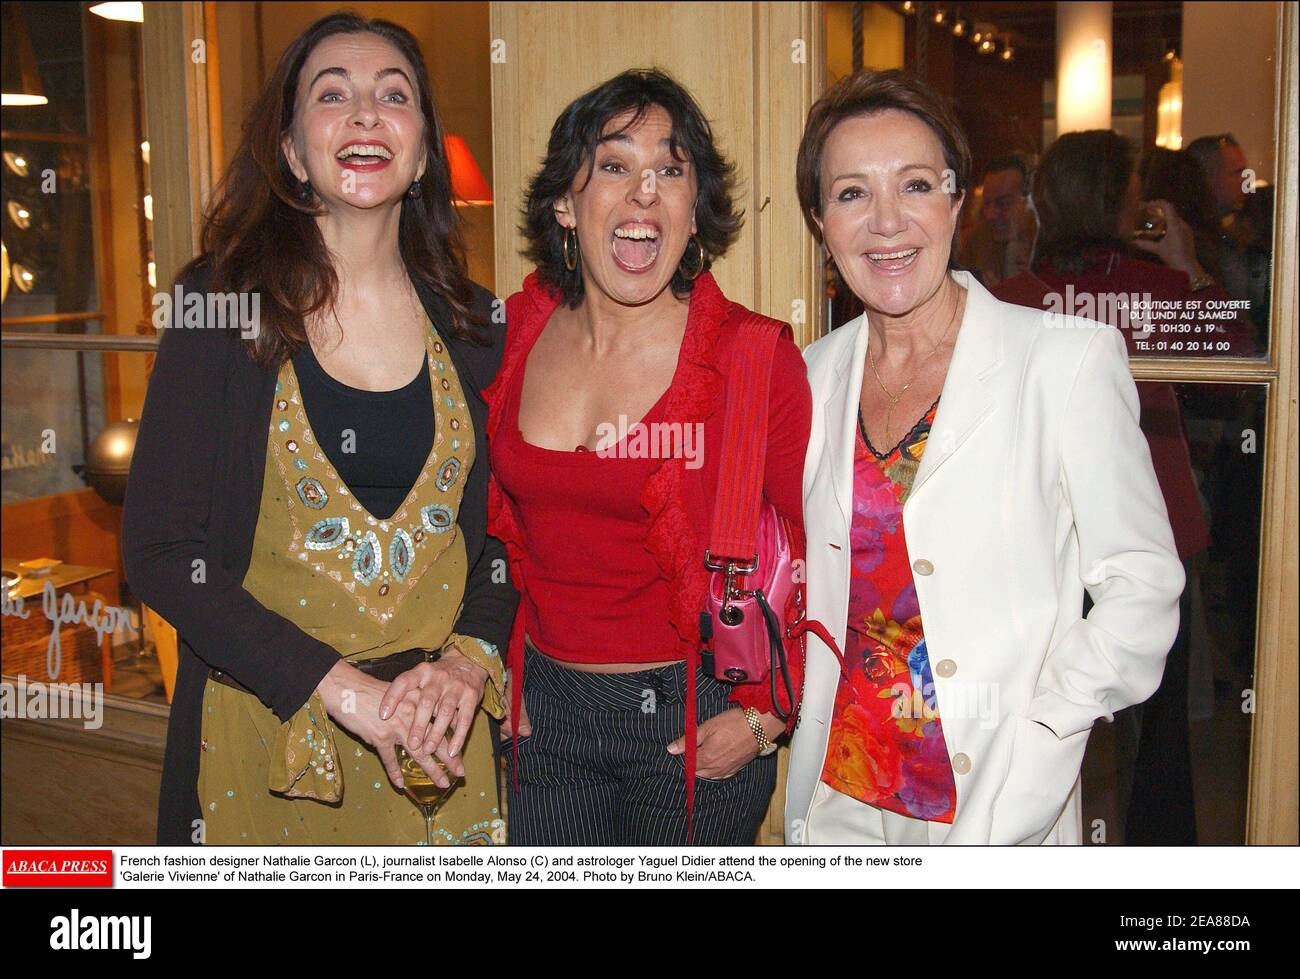 French fashion designer Nathalie Garcon (L), journalist Isabelle Alonso (C) and astrologer Yaguel Didier attend the opening of the new store 'Galerie Vivienne' of Nathalie Garcon in Paris-France on Monday, May 24, 2004. Photo by Bruno Klein/ABACA. Stock Photo